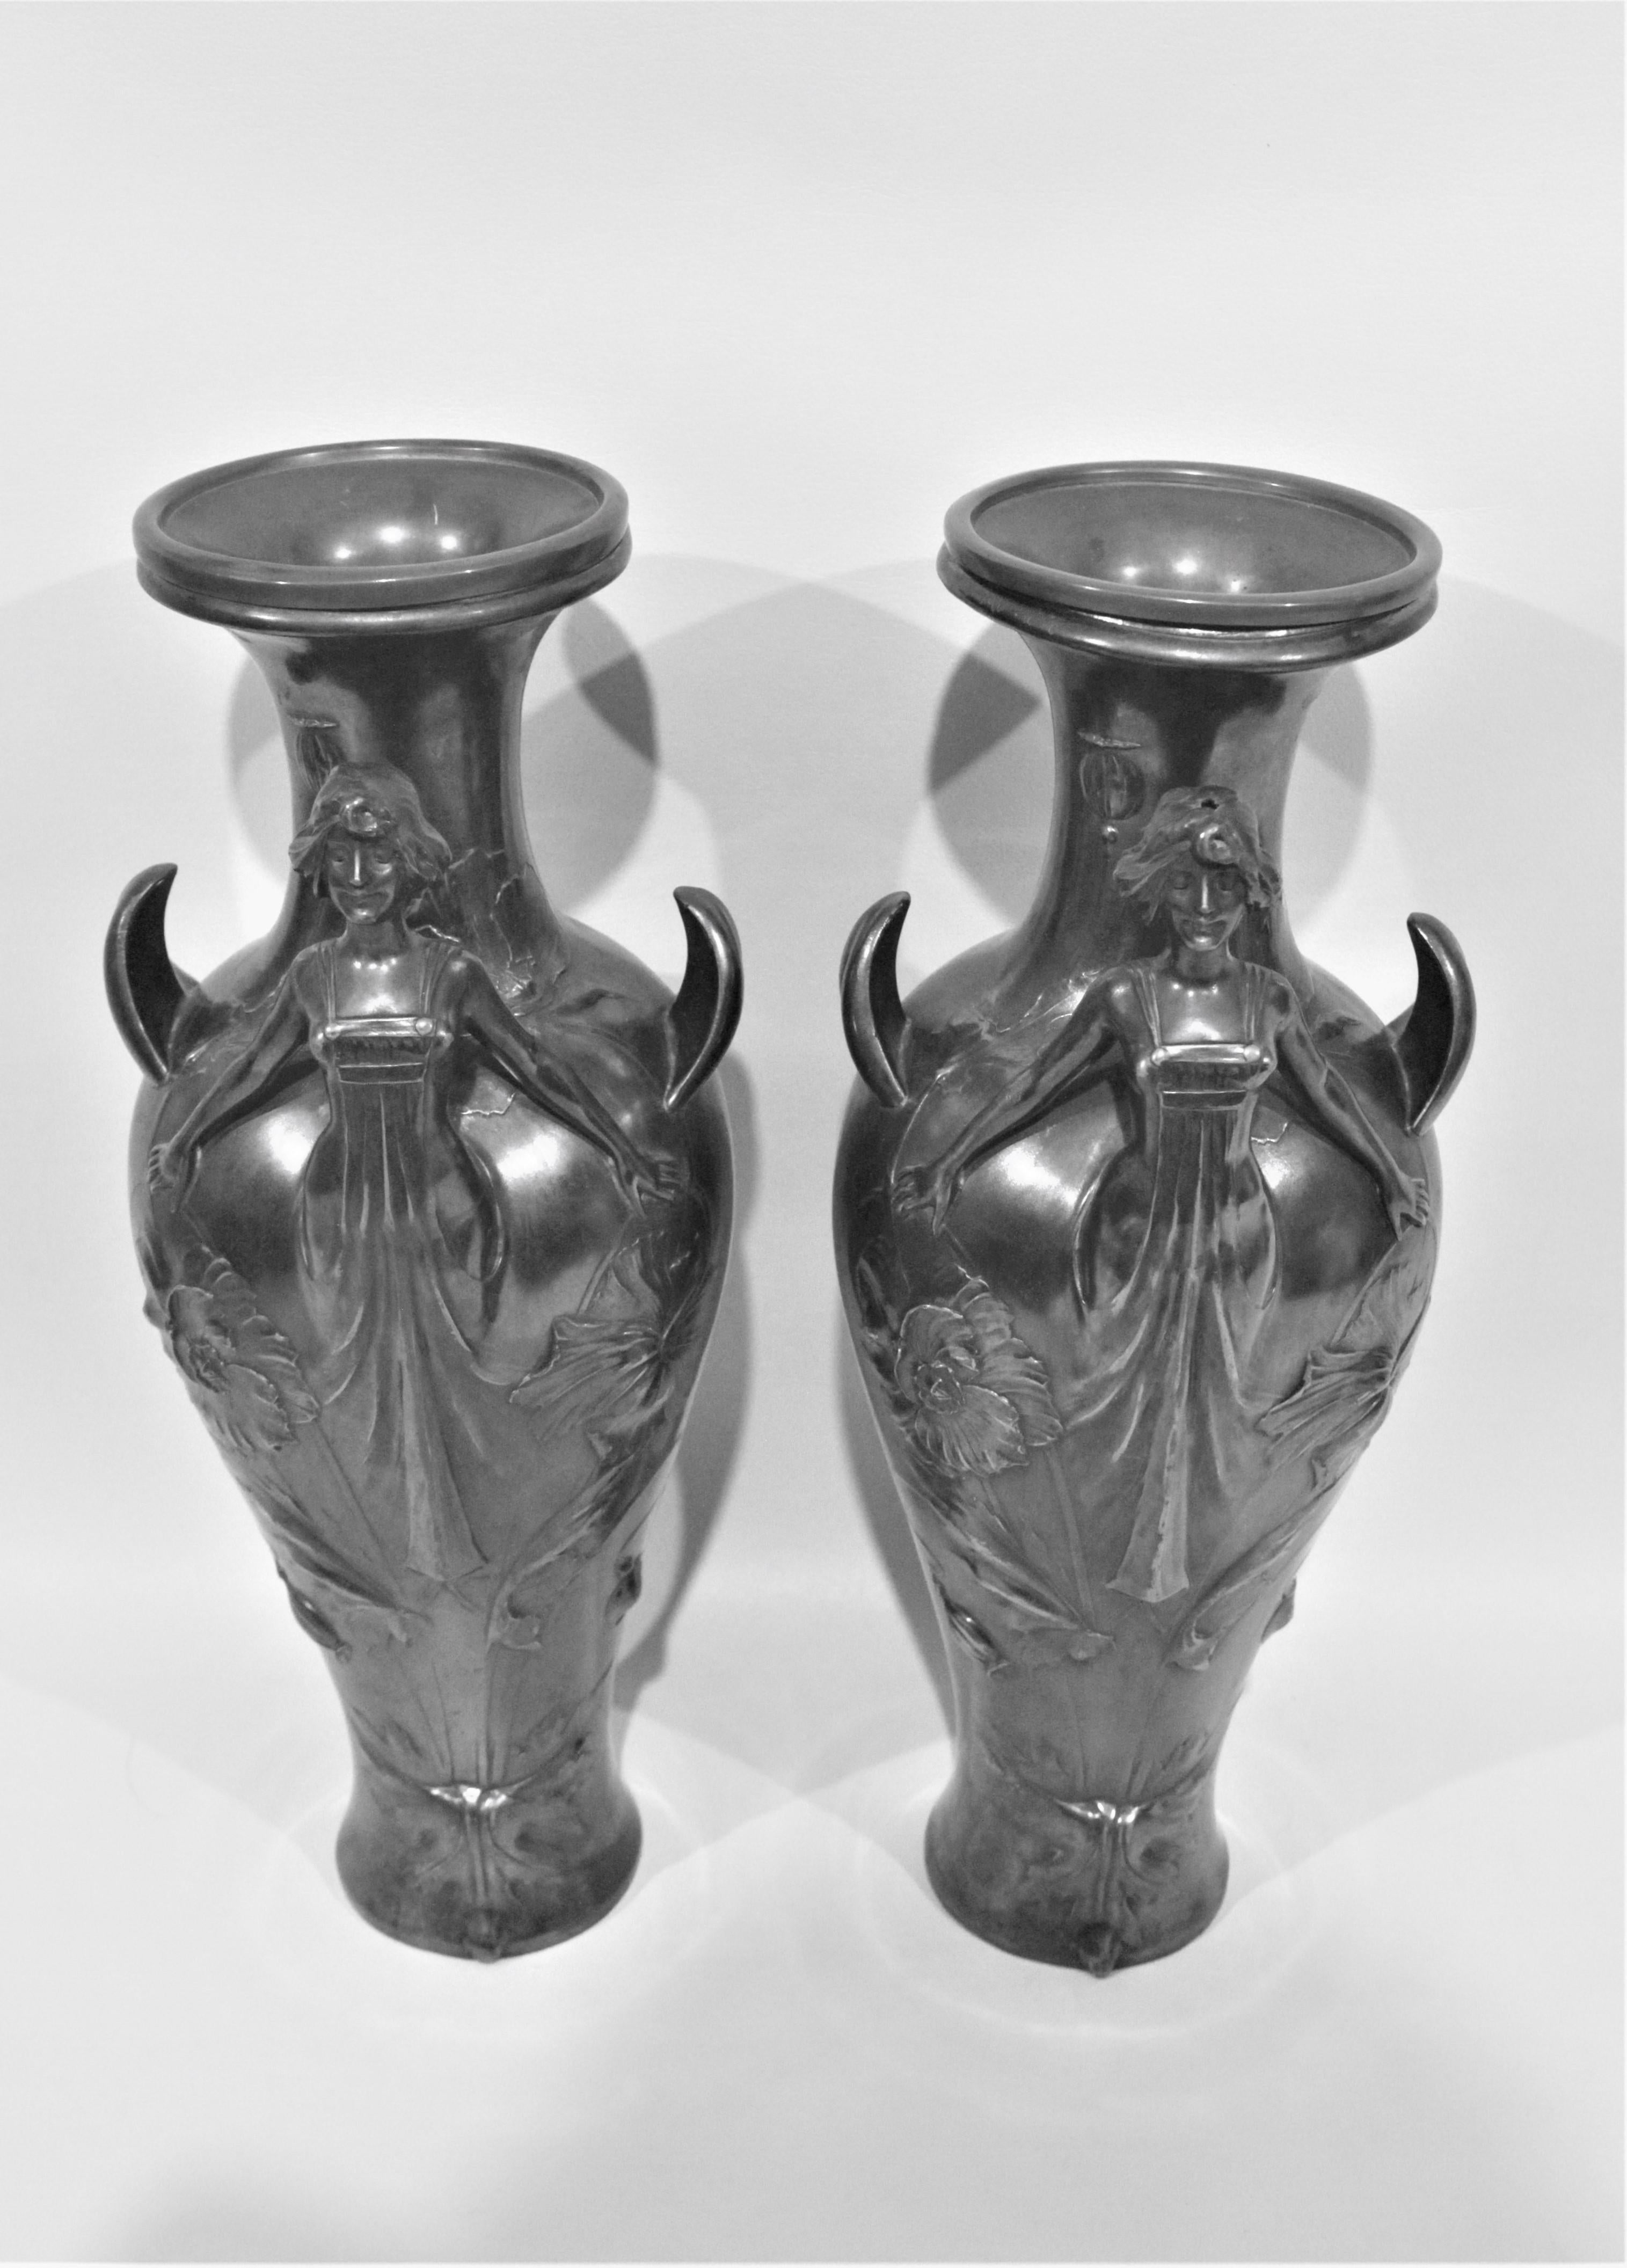 Pair of Art Nouveau Silver Plated Vases with Stylized Female Figures For Sale 4